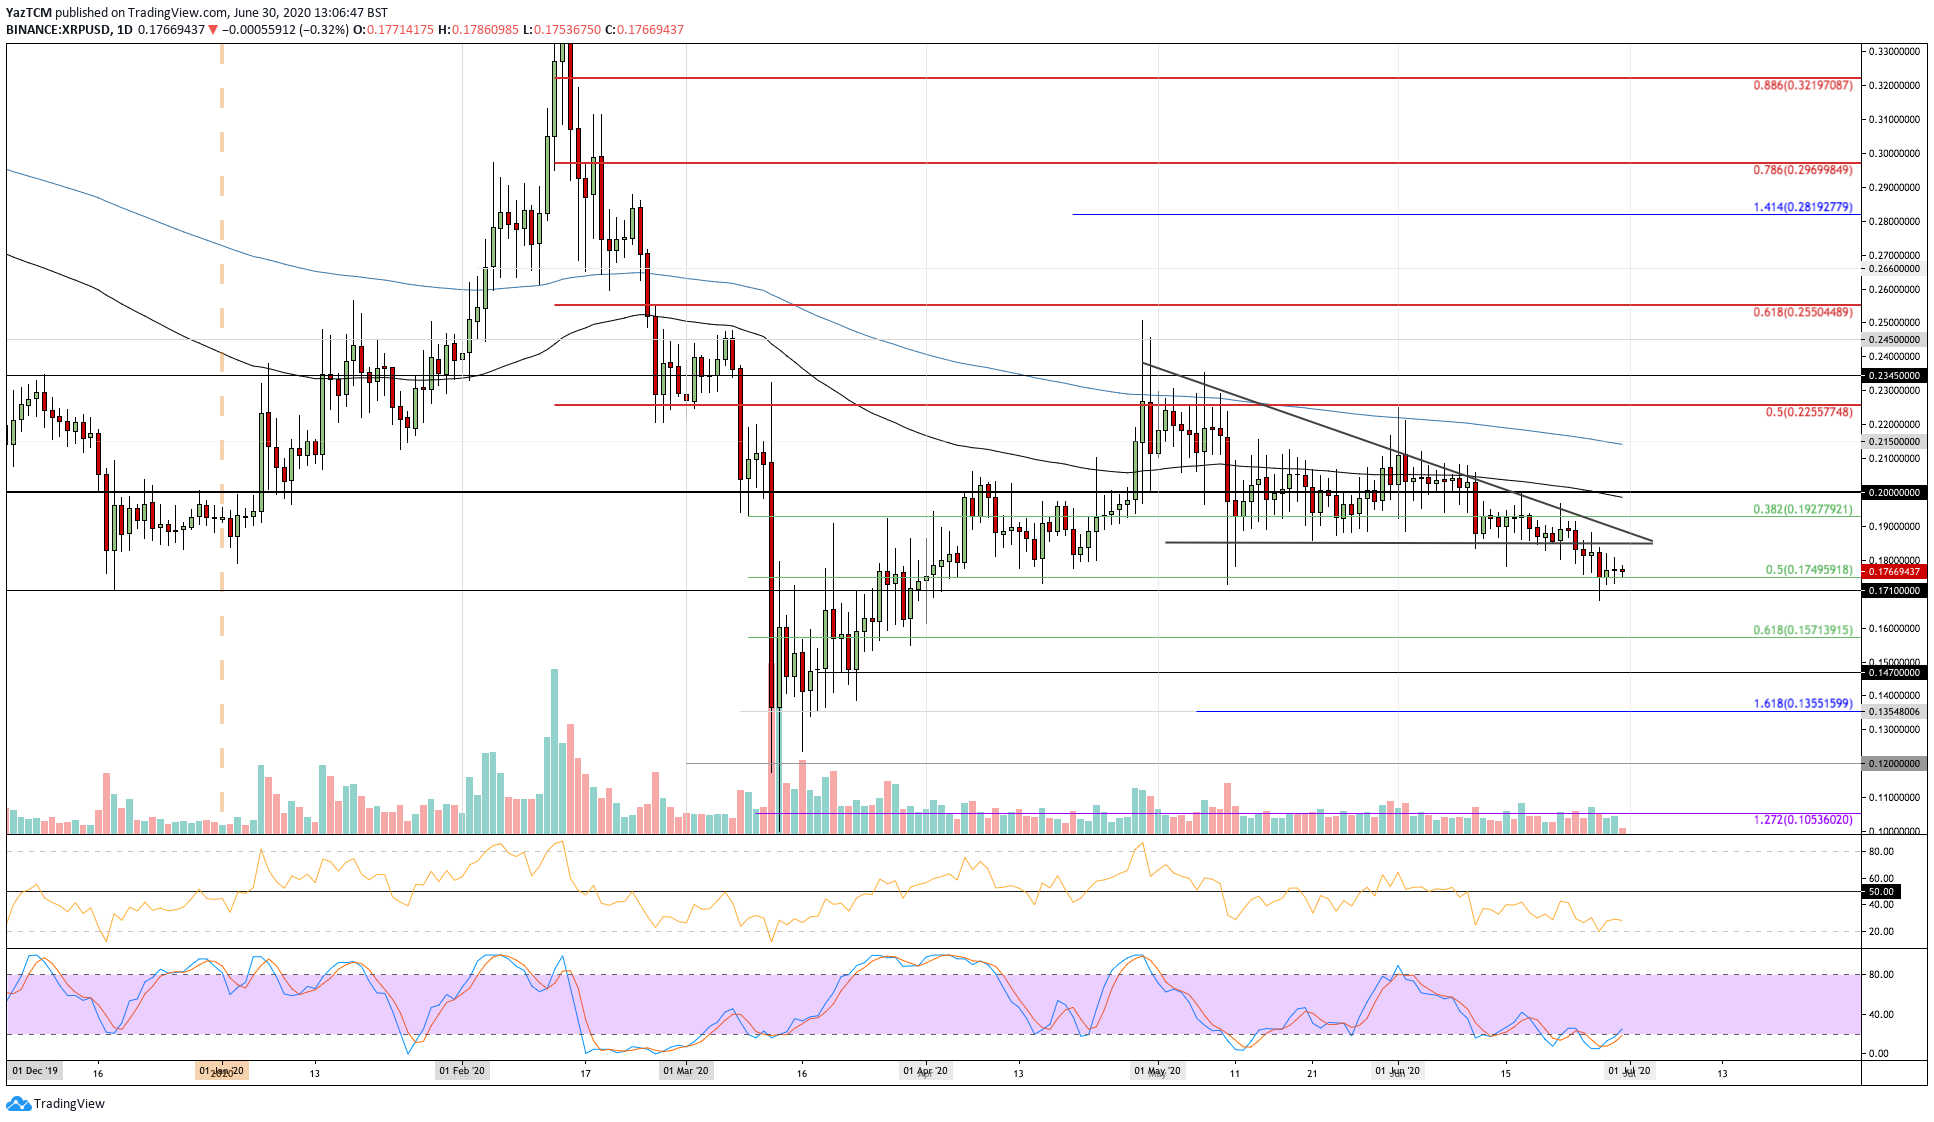 Ripple Price Analysis: Can The Bulls Prevent XRP From Slipping Towards $0.15?